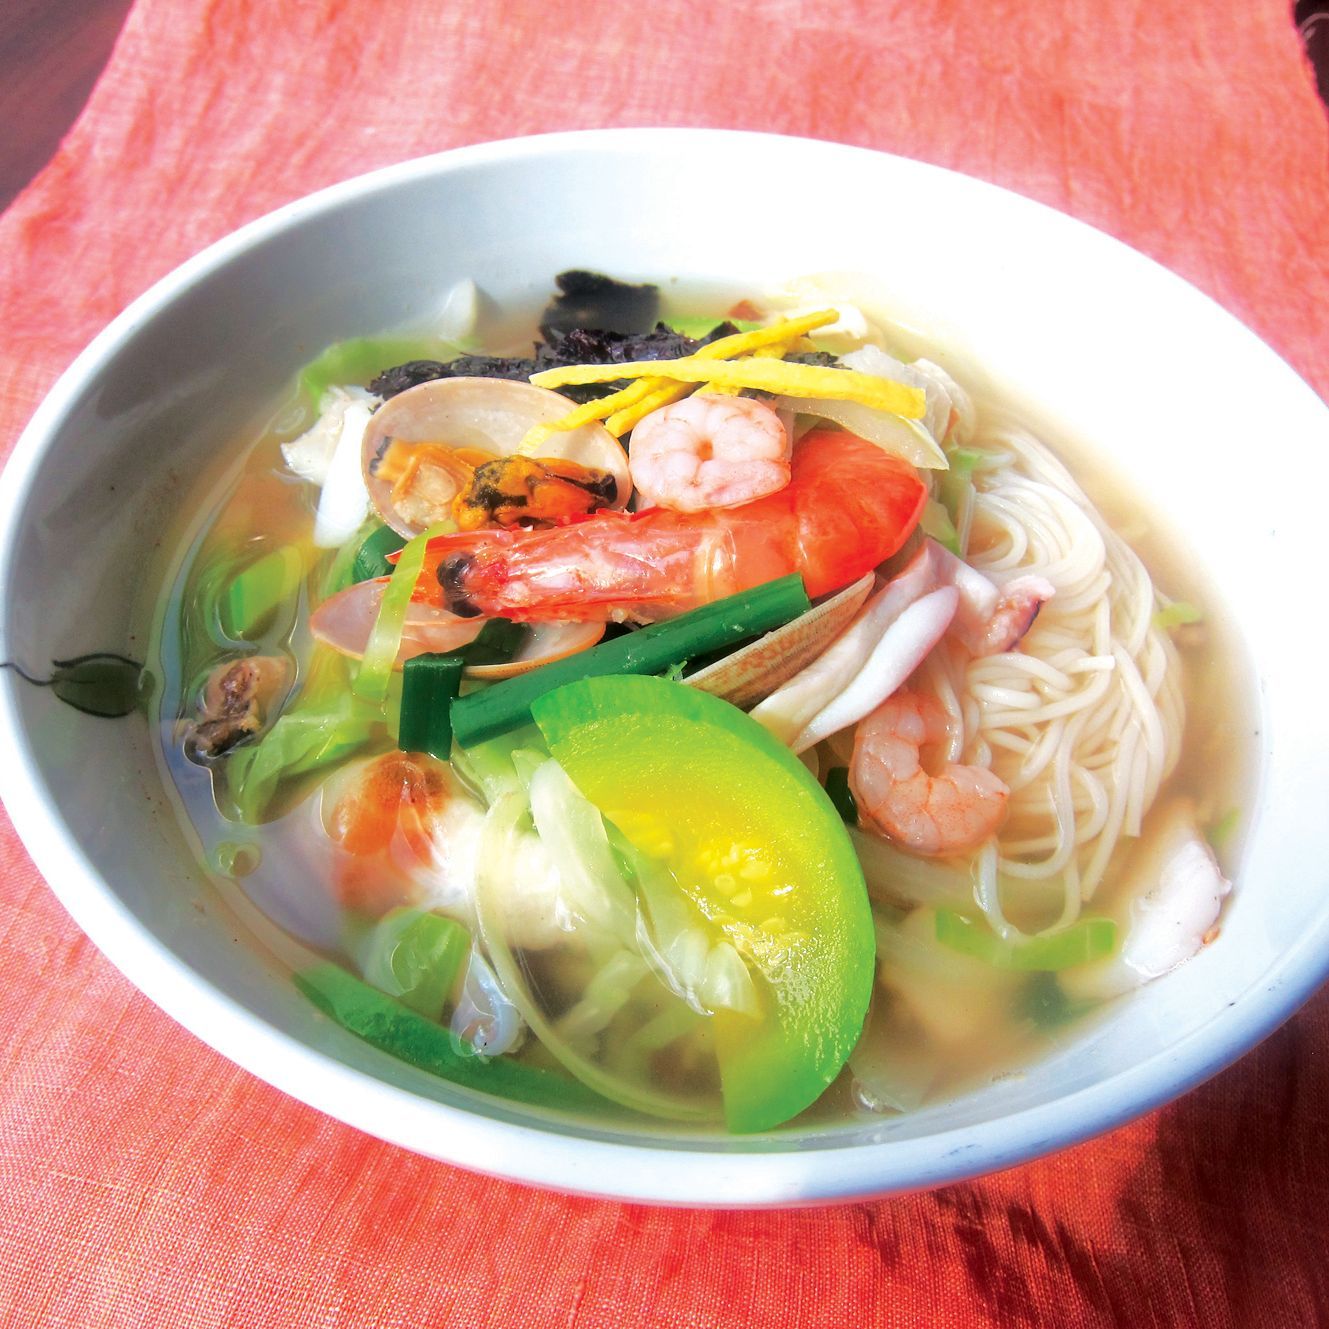 113 HaeMool OhnMyun (Noodles in Soup with Seafood & Vegetables)